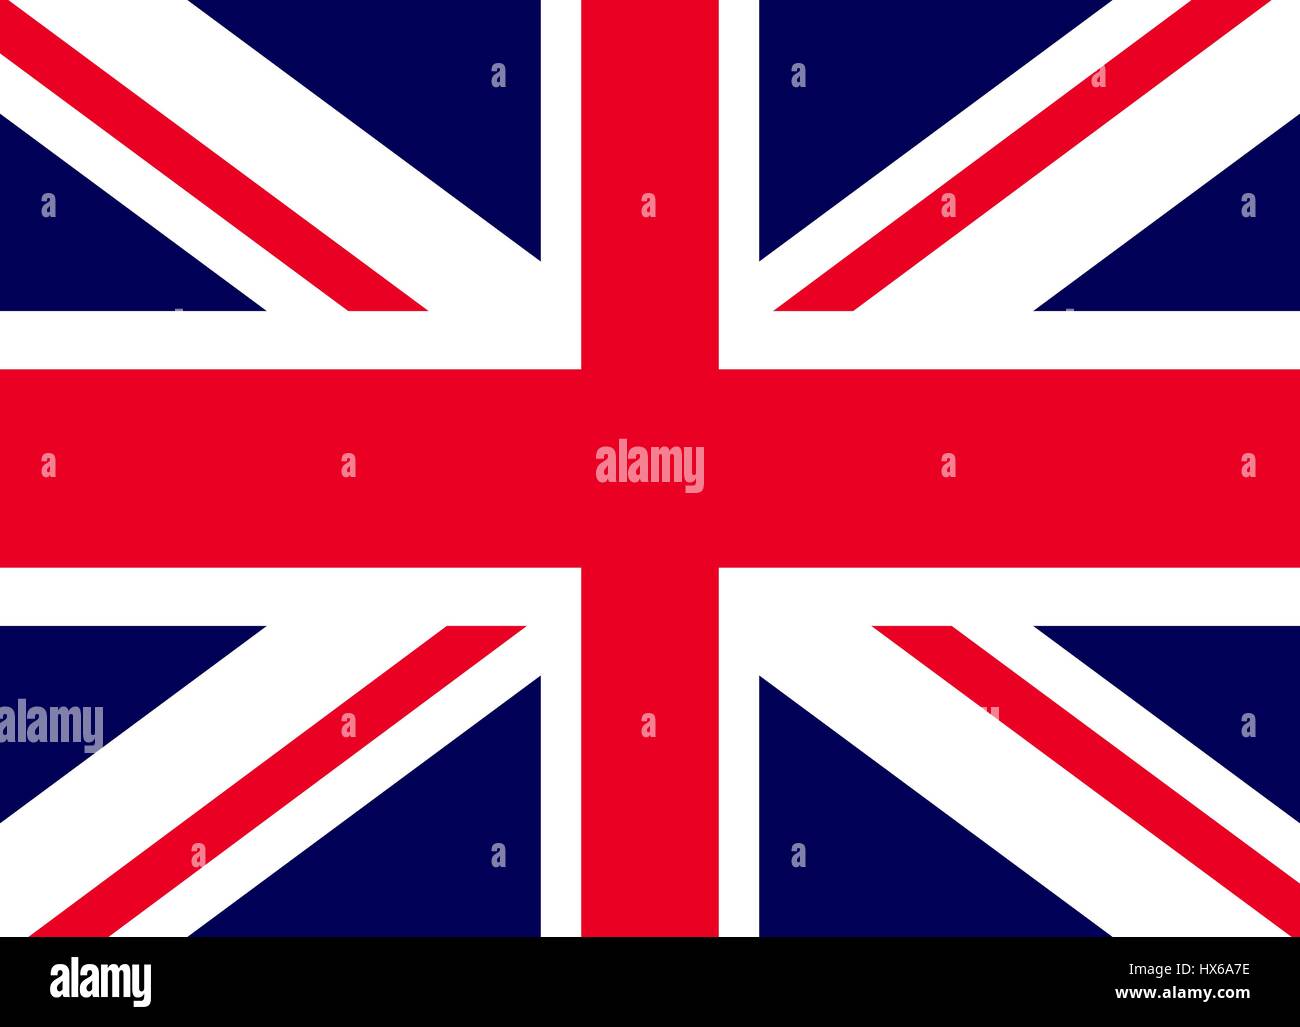 English culture Stock Vector Images - Alamy